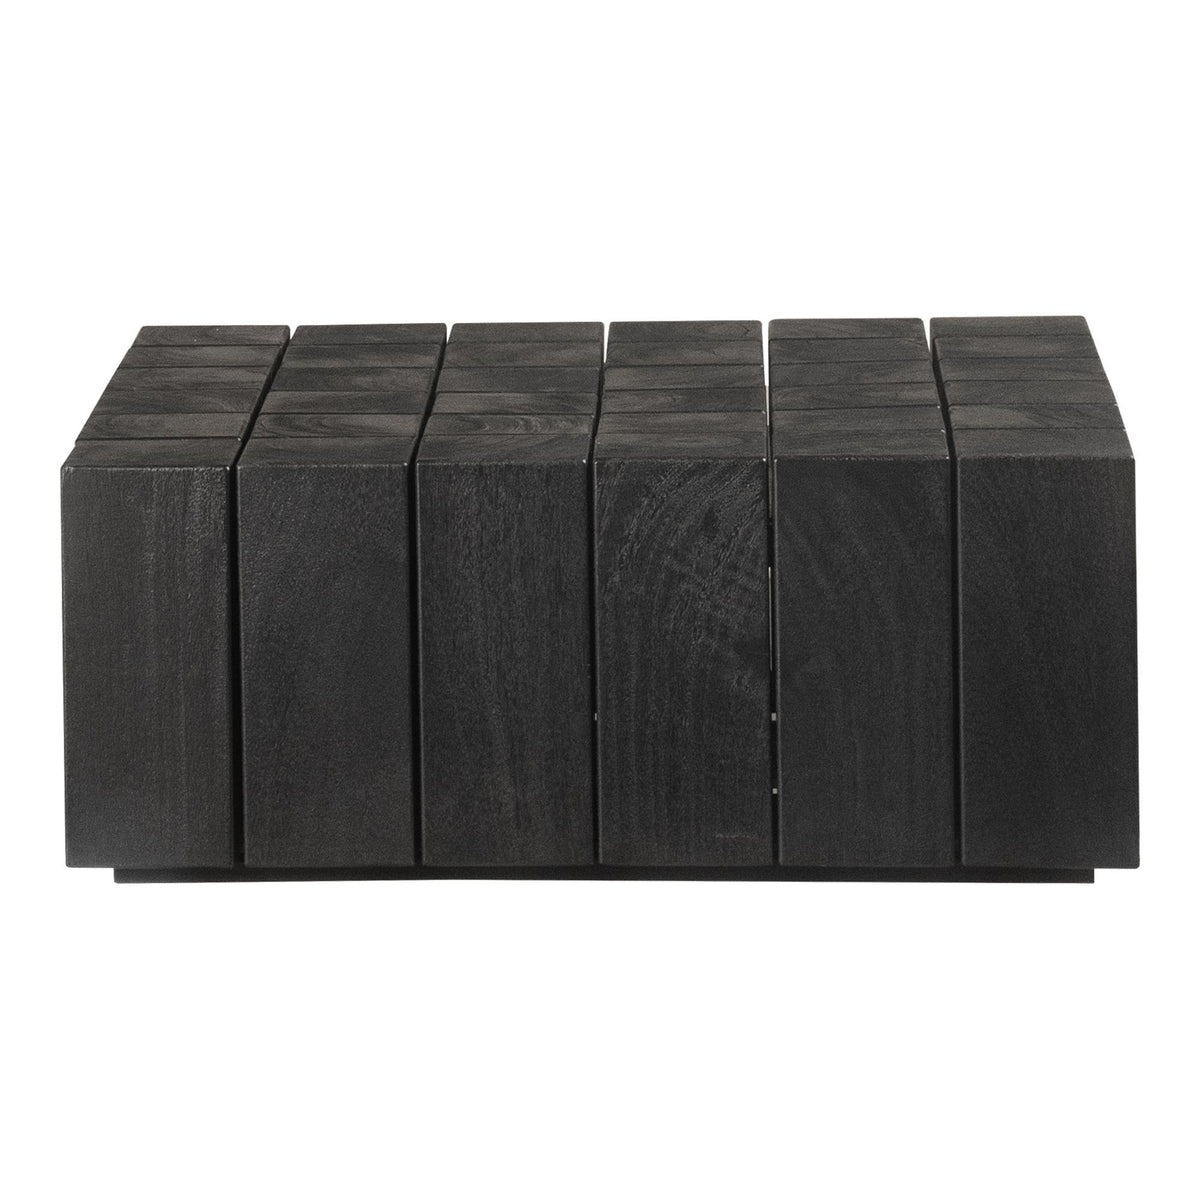 Moe's Home Collection Prii Coffee Table Black - EI-1072-02